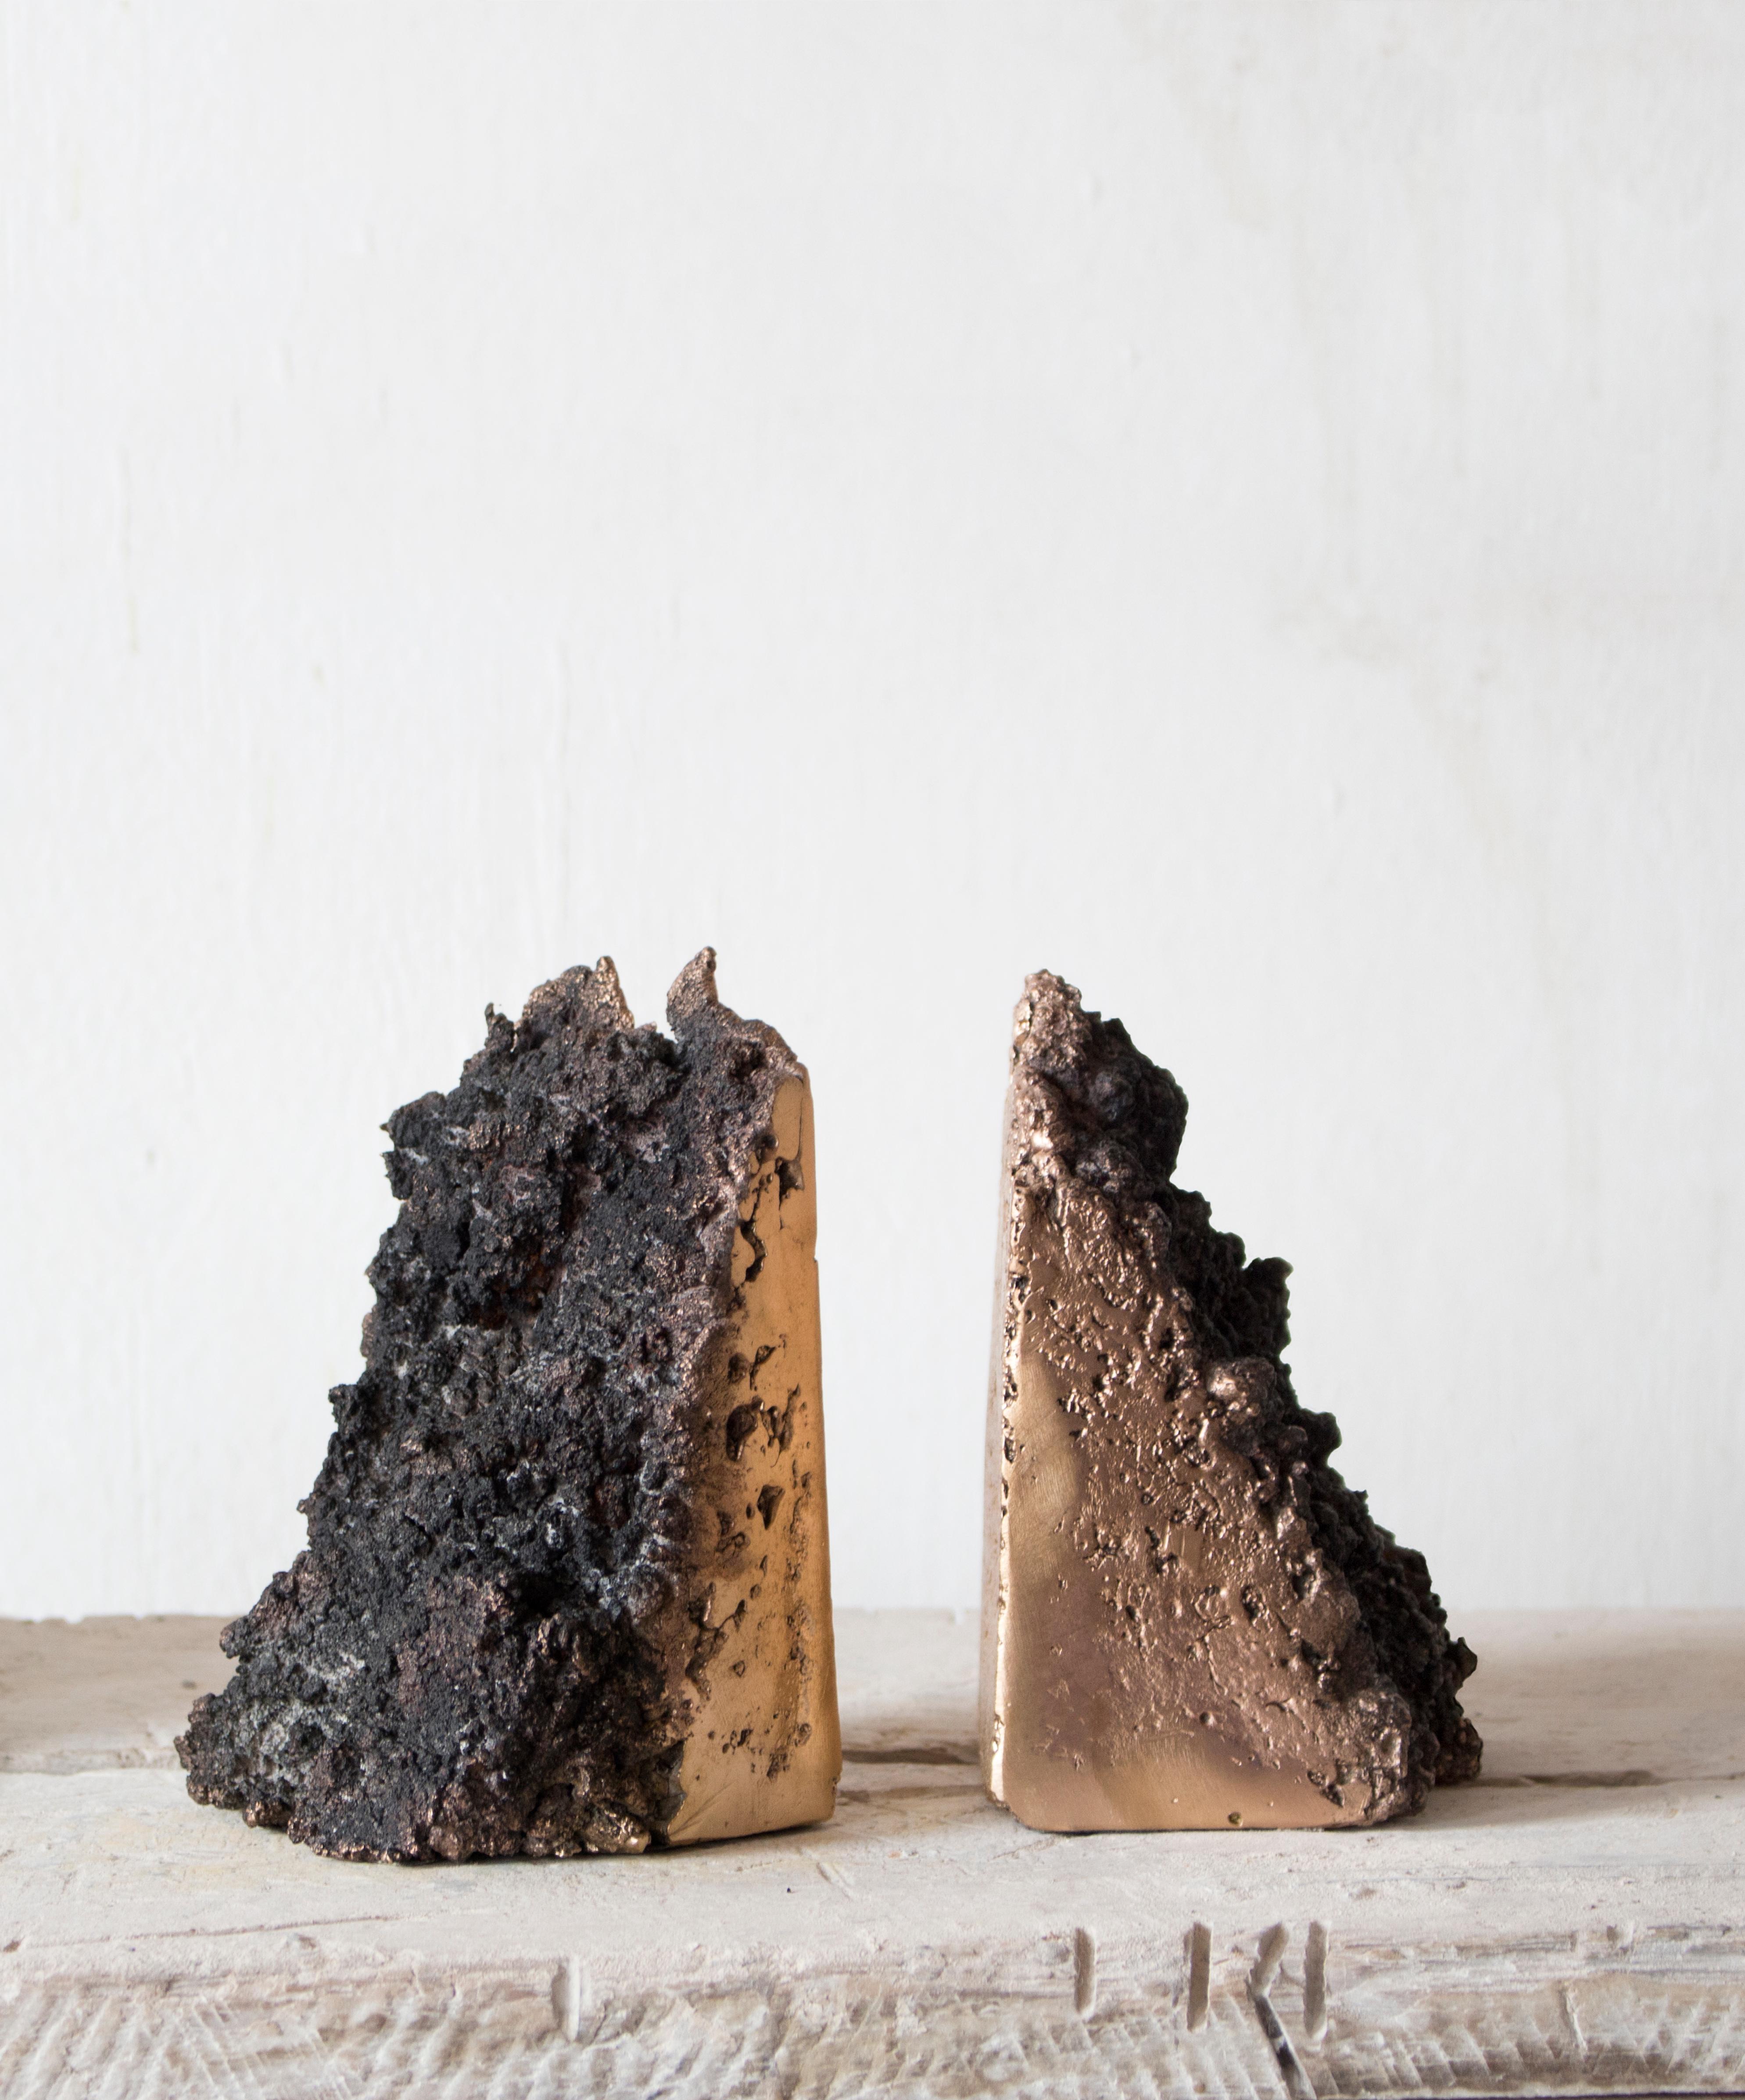 Secondo Fuoco is an investigation into bronze, a reflection on the multiple souls of matter: its mineral origin, re-obtained by smelting processes and its artificiality. A sculptural and material collection that combines the purity of bronze with